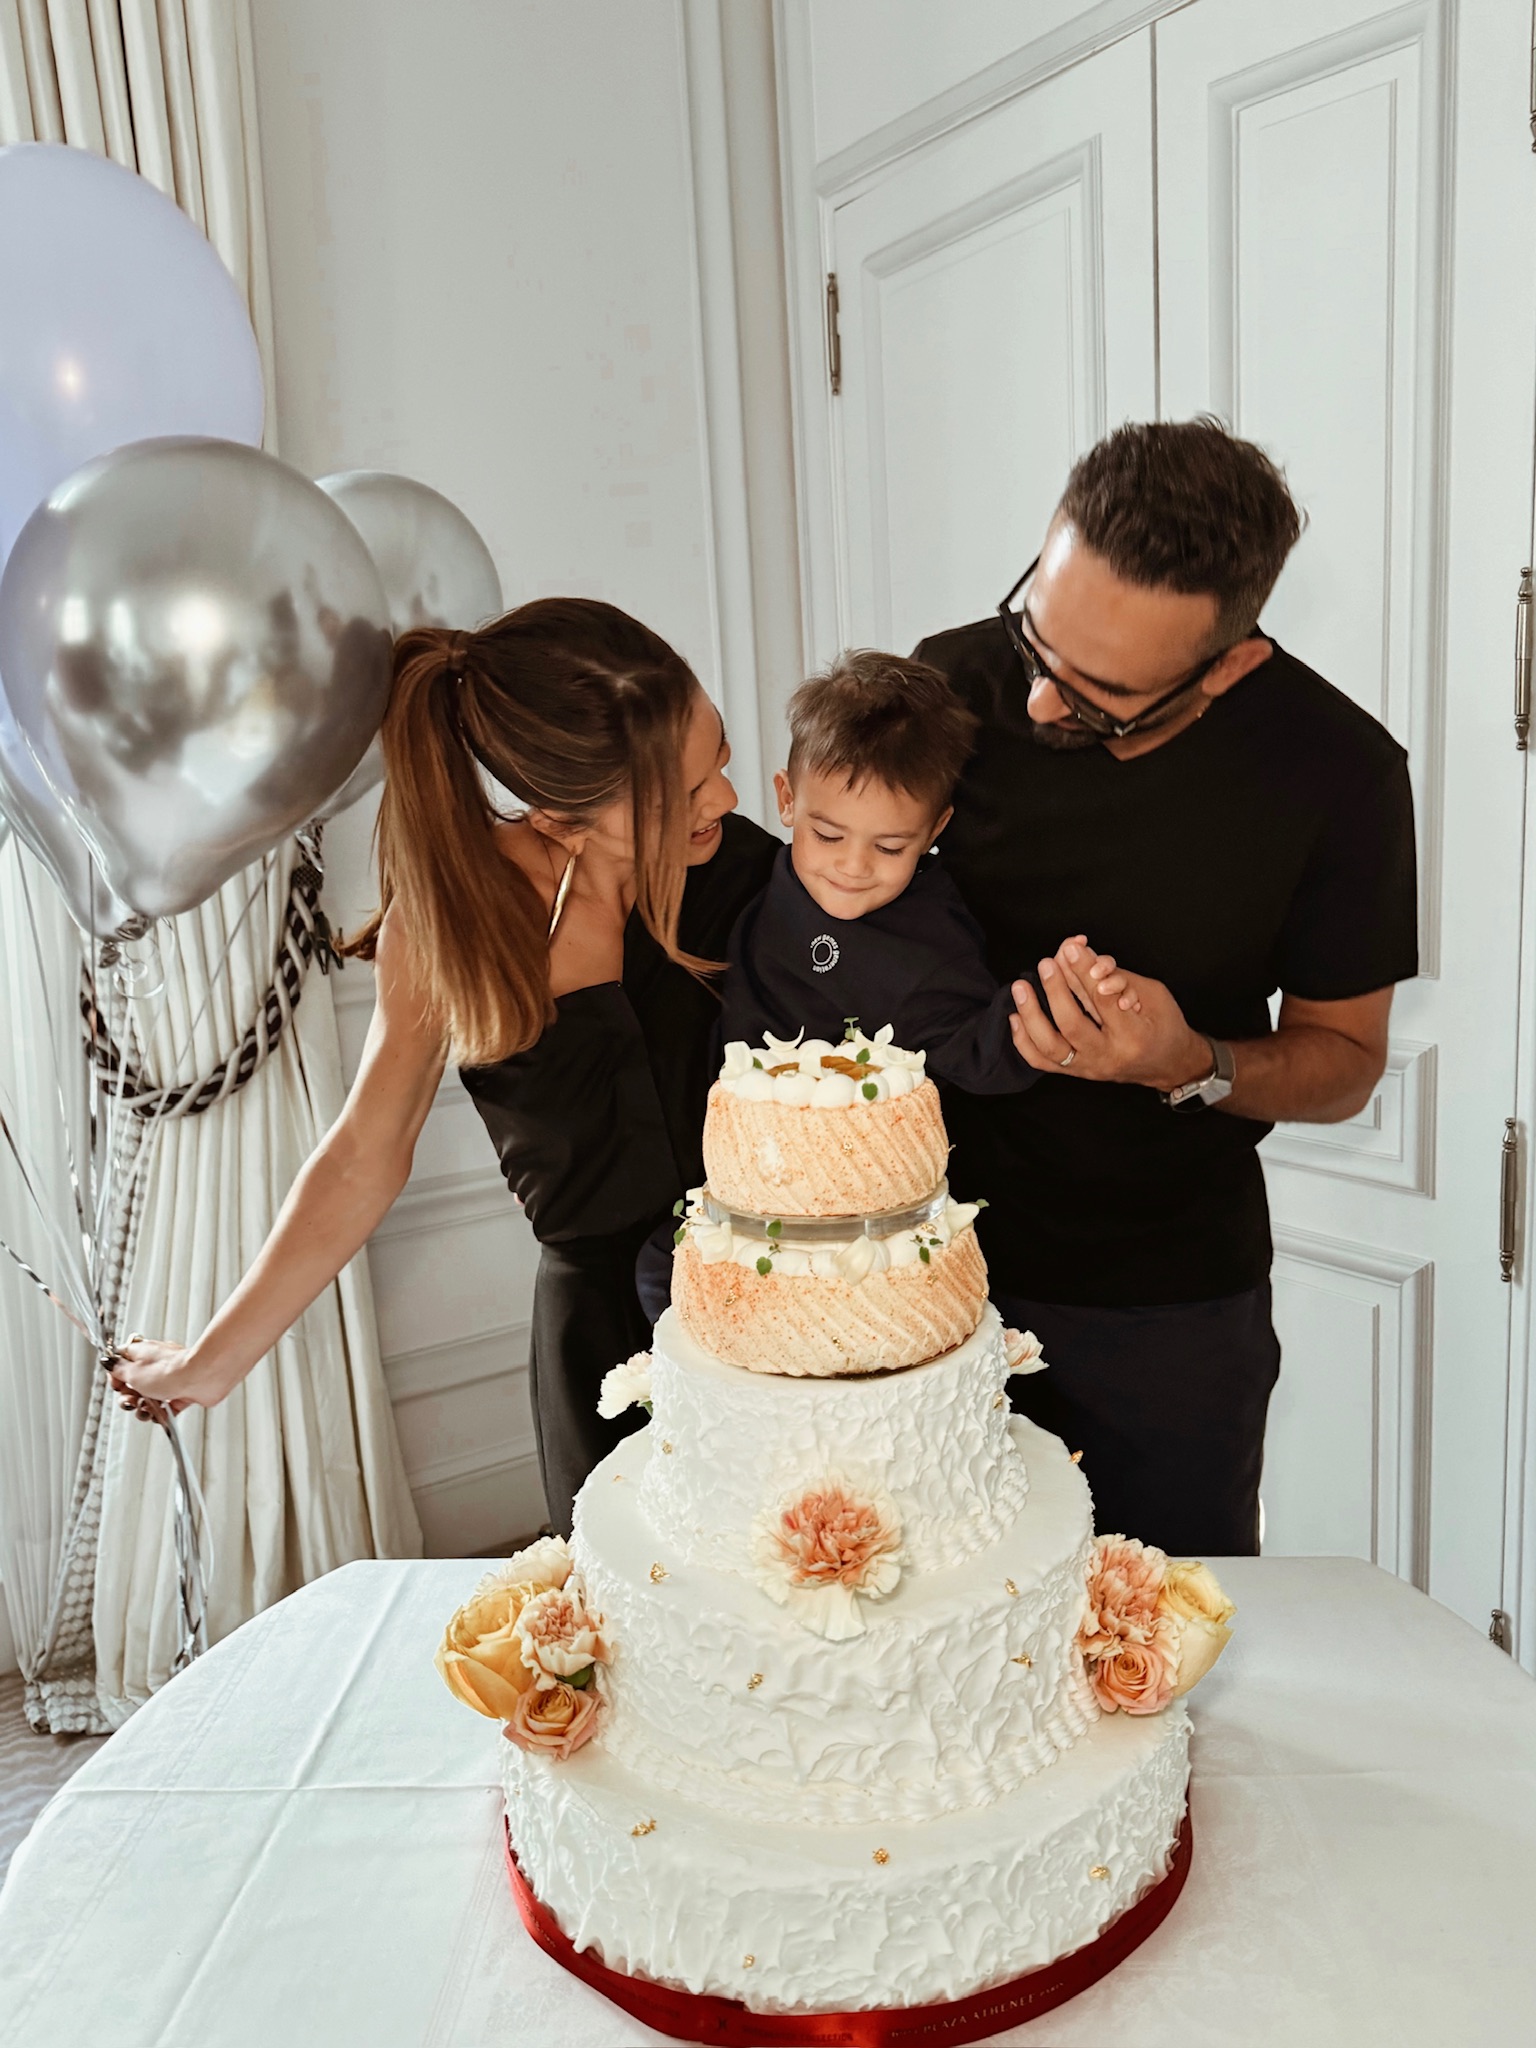 Camila Coelho with her husband and son